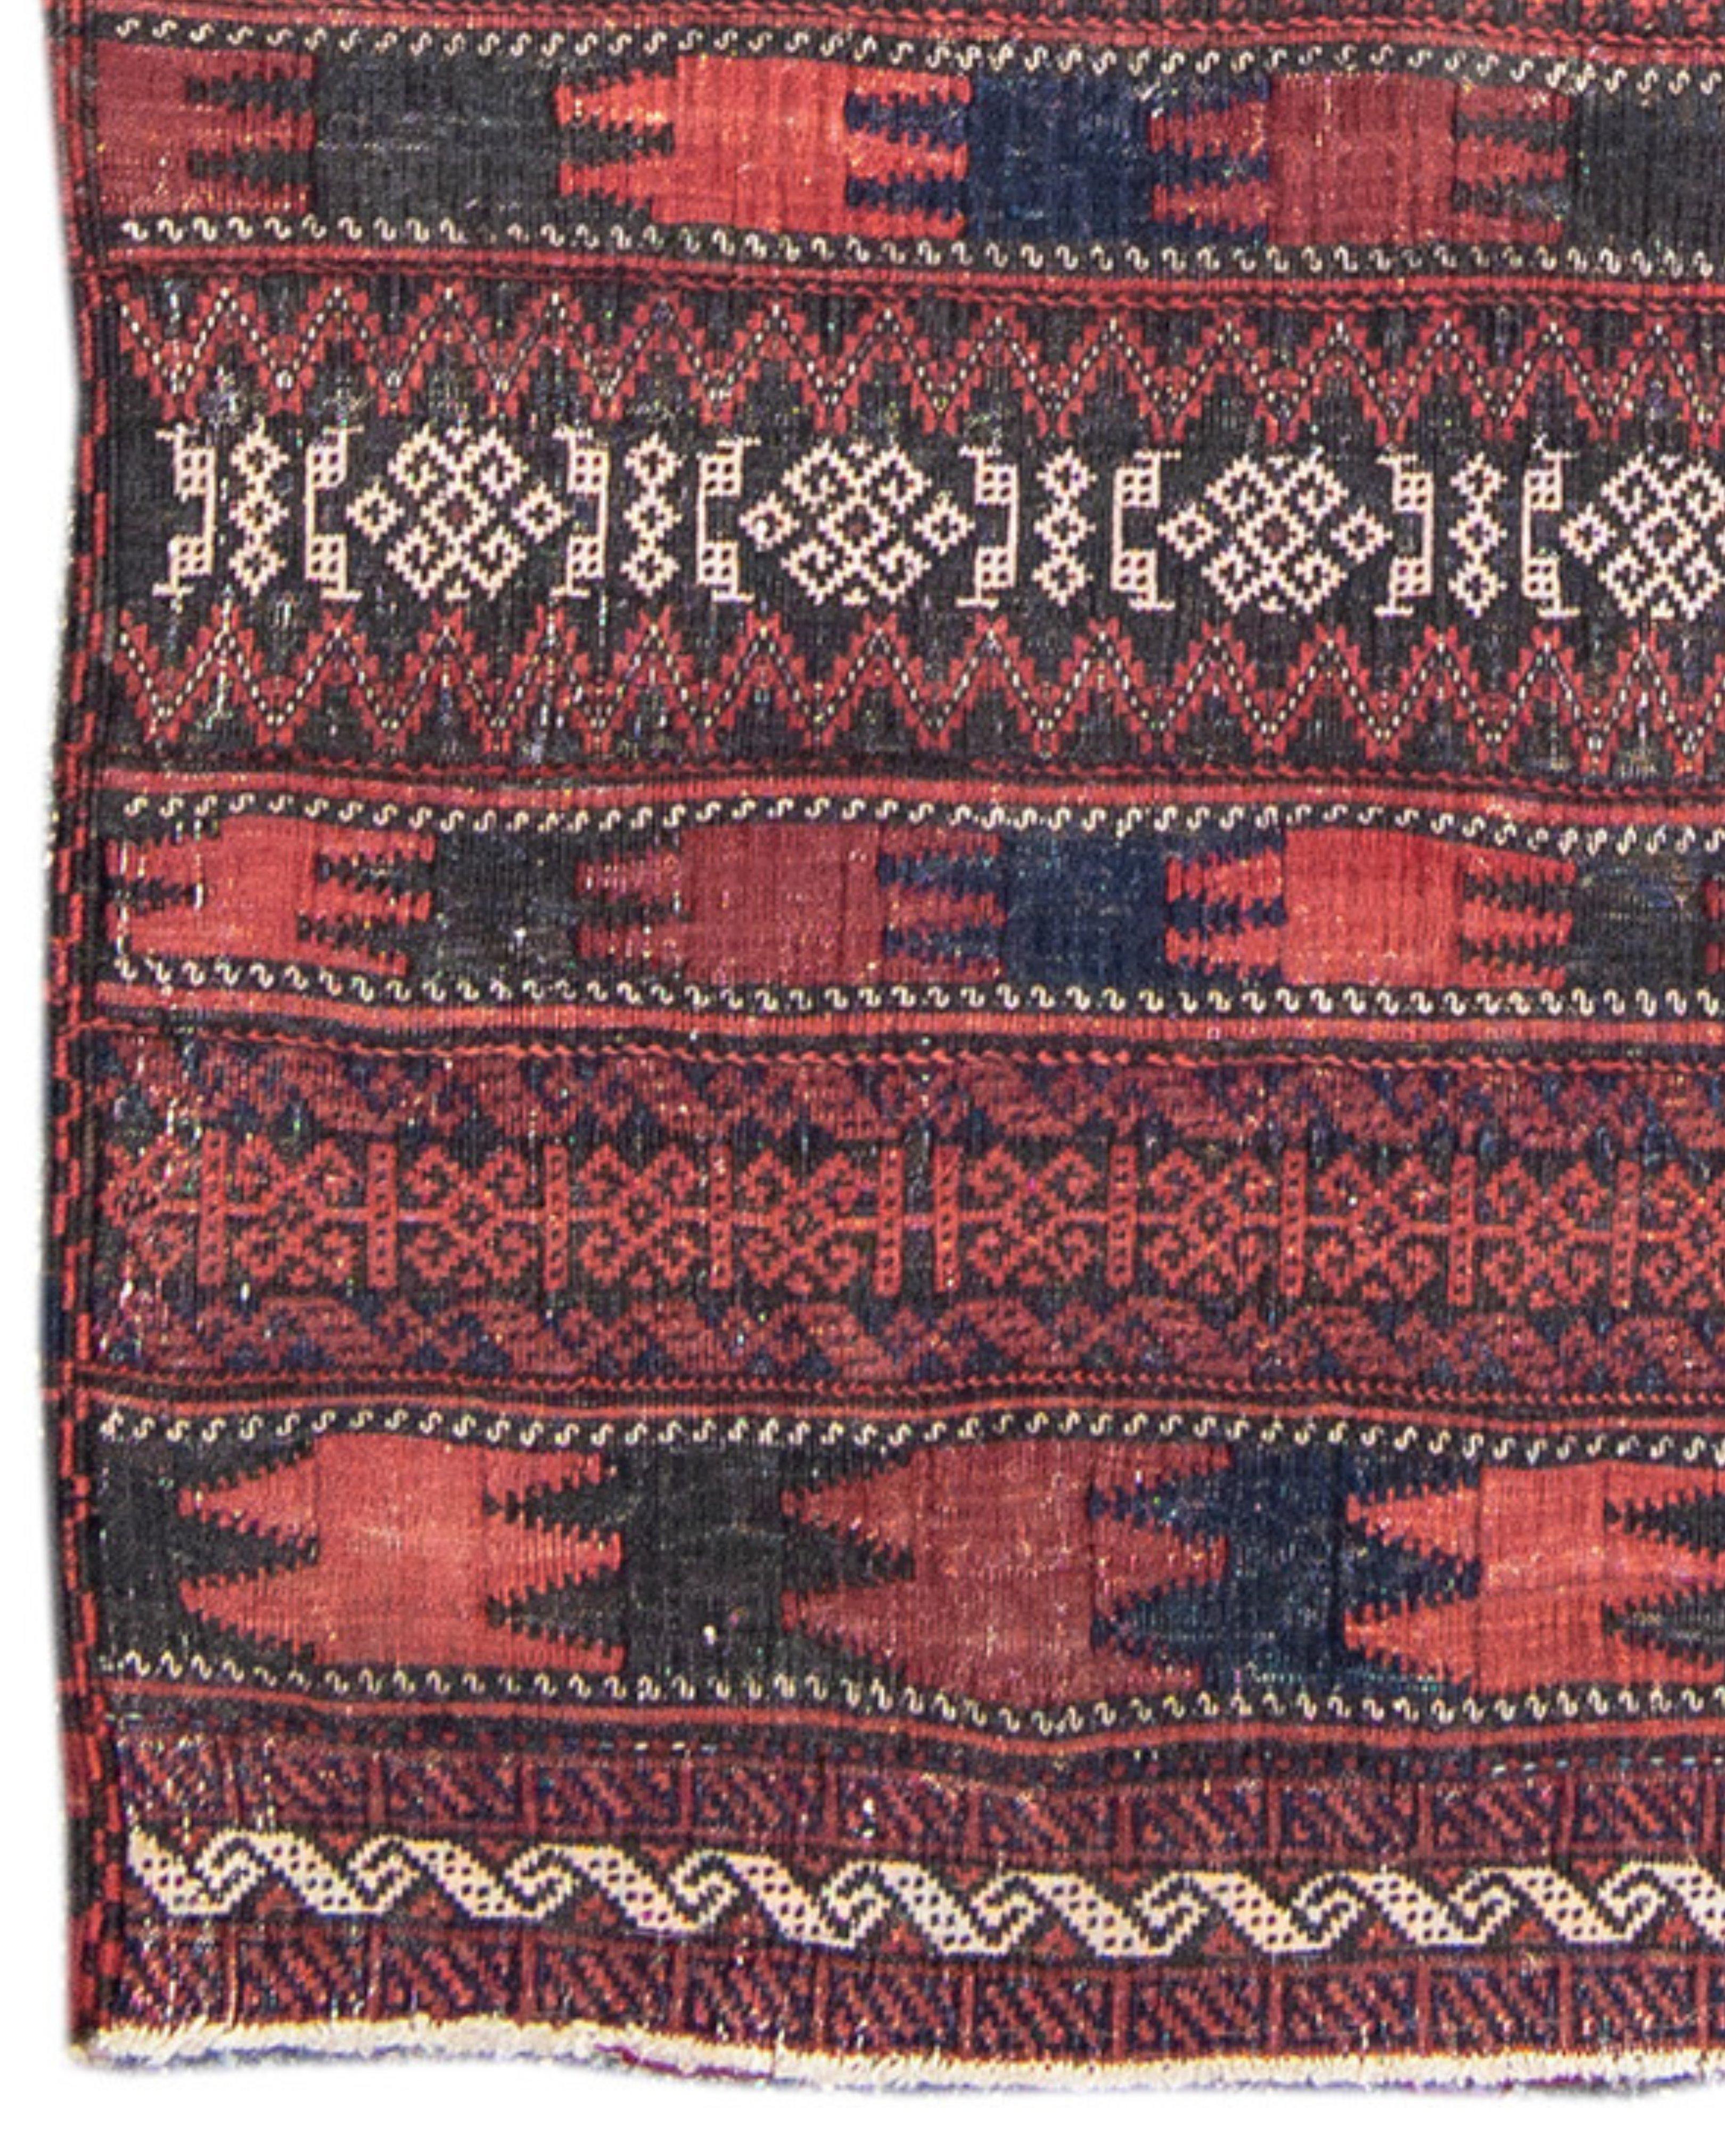 Hand-Knotted Baluch Flat-Woven Rug, c. 1900 For Sale